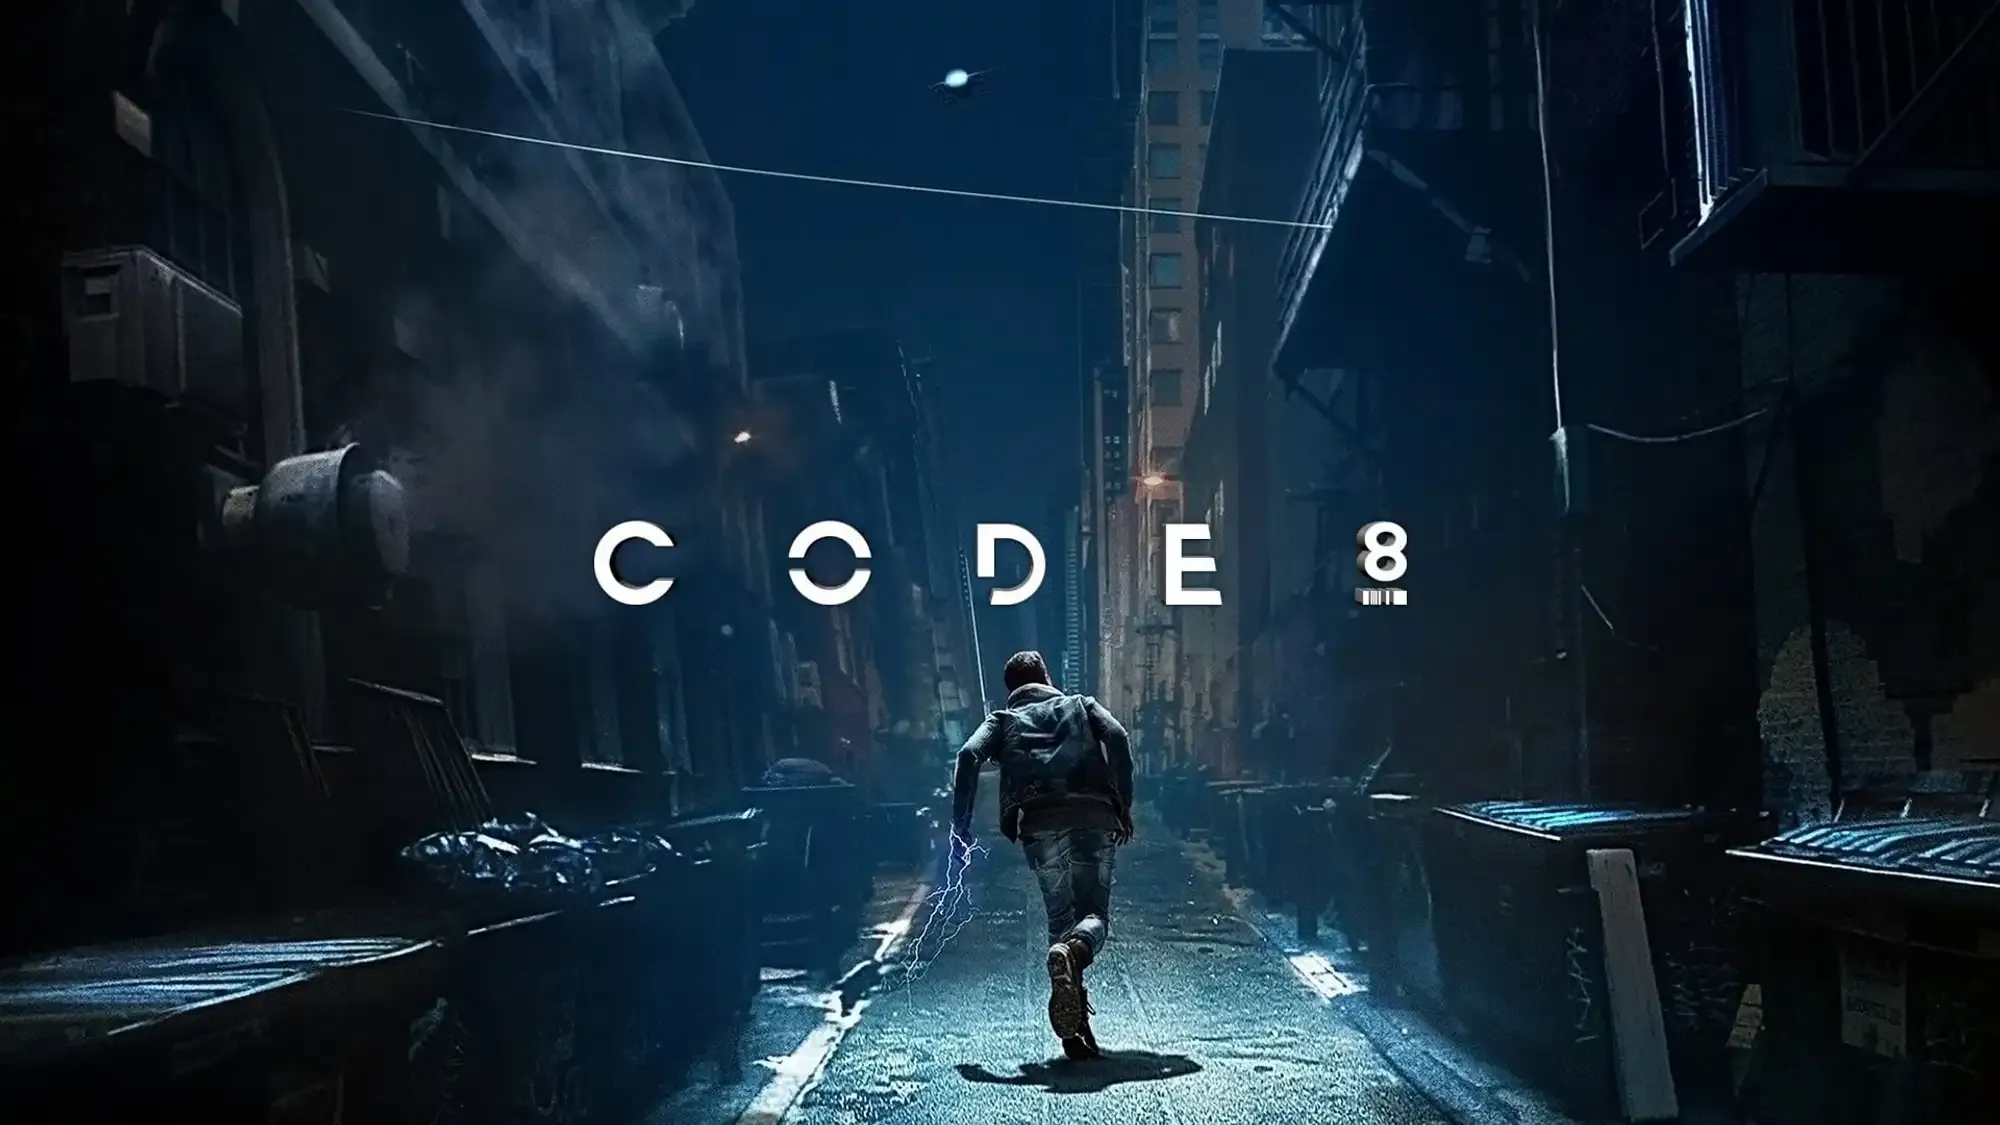 Code 8 movie review